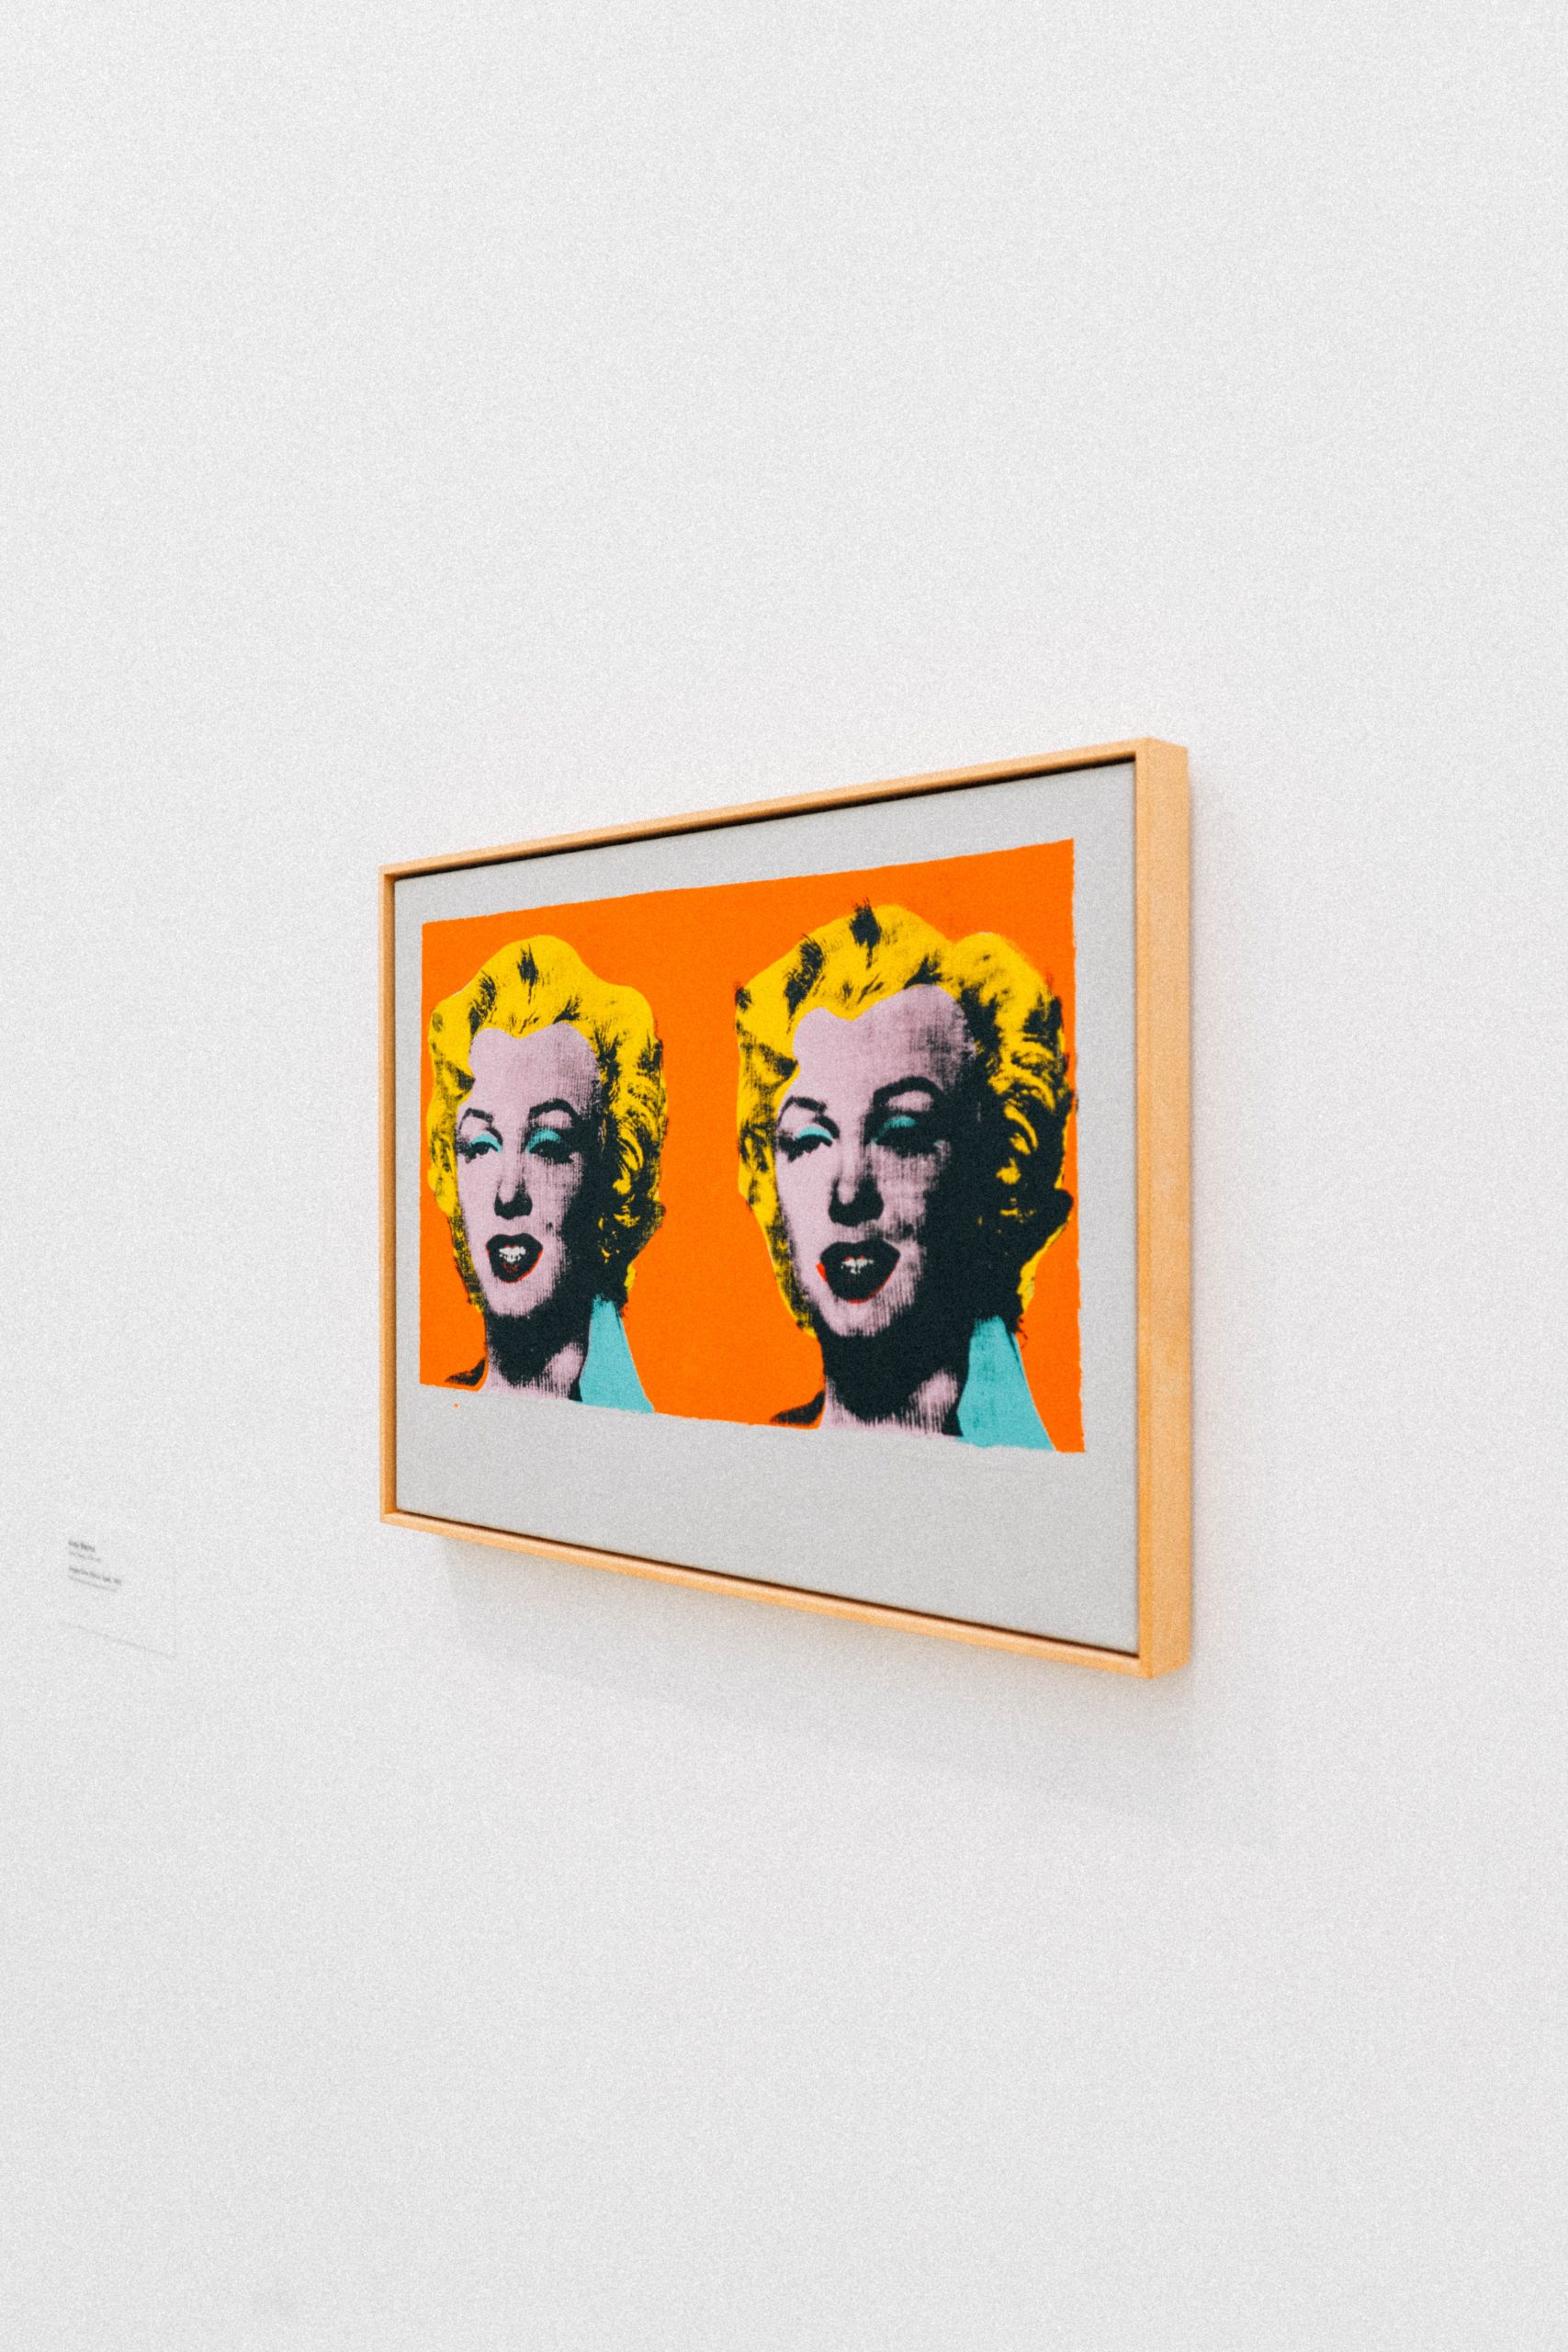 Marilyn Monroe painting hanging on the wall